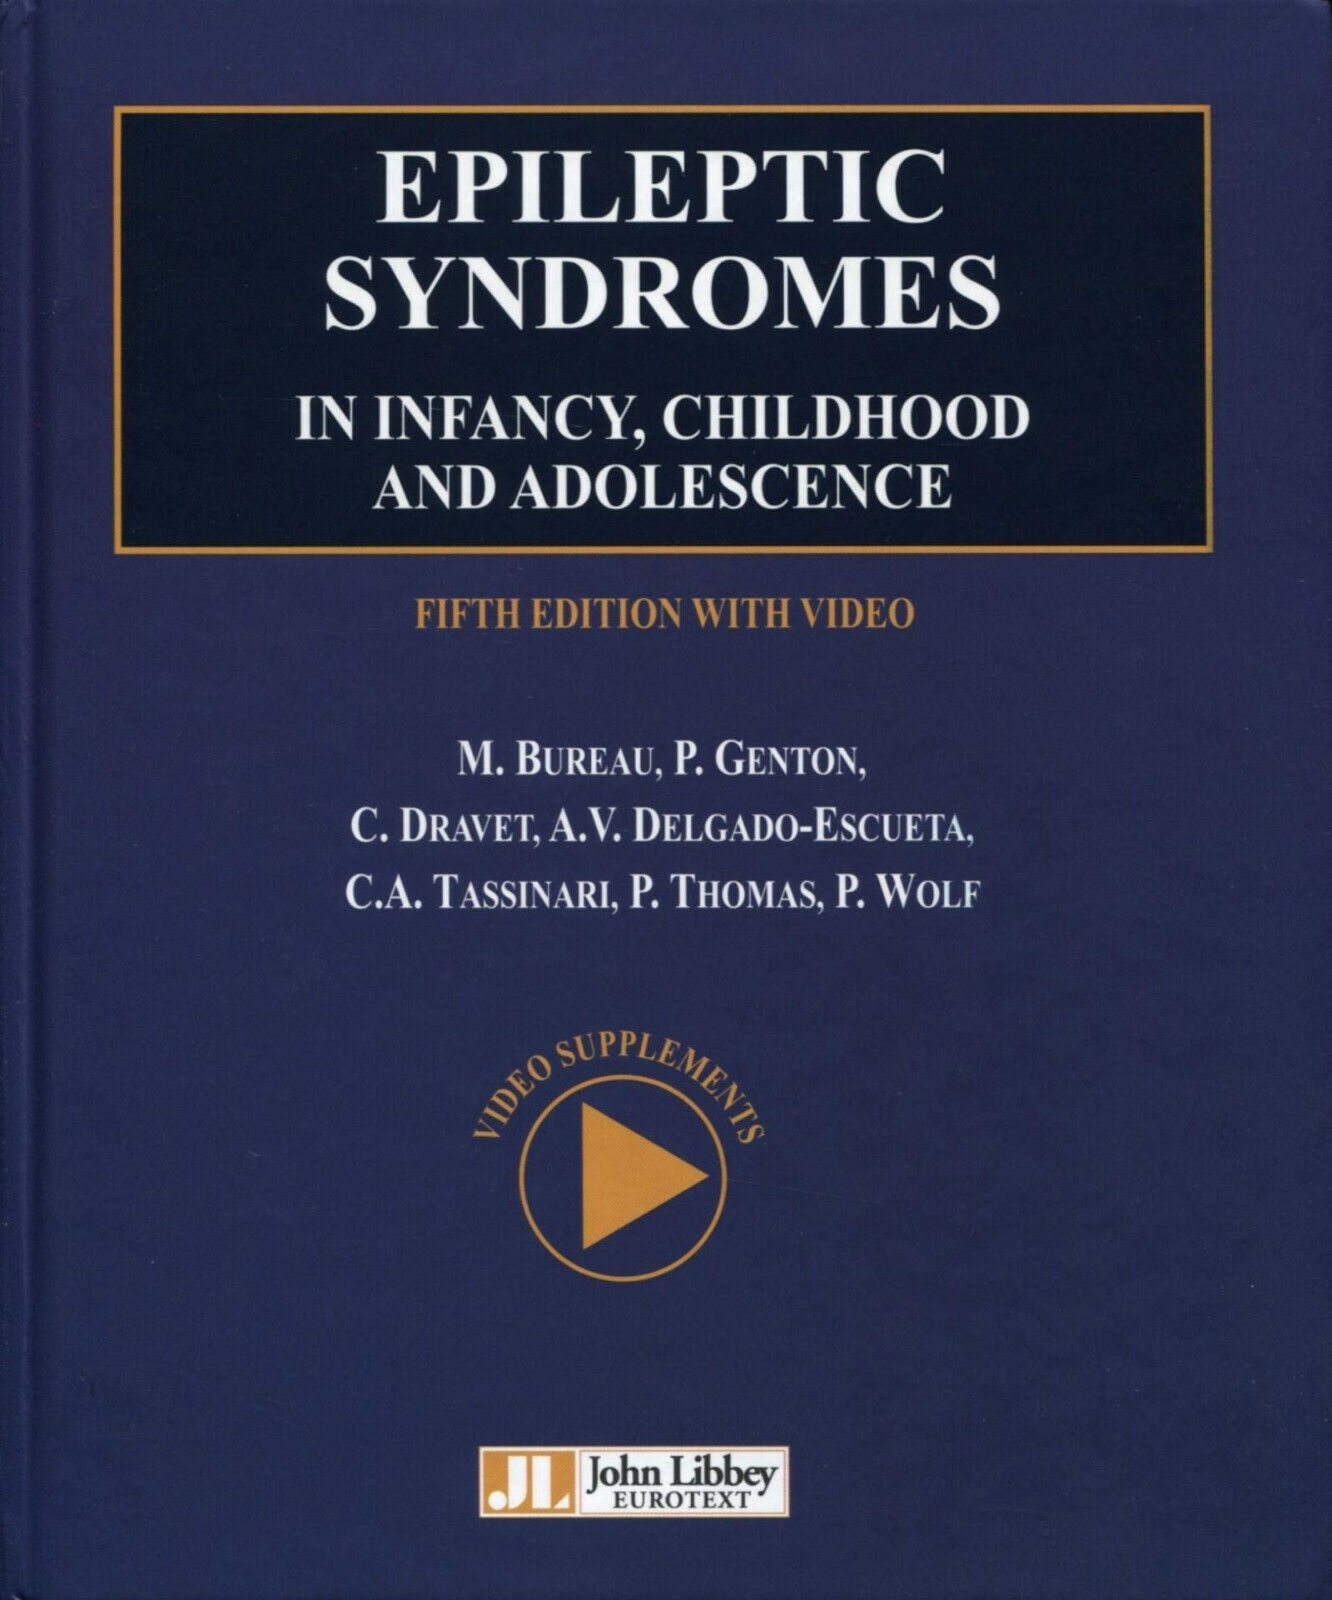 Epileptic syndromes in infancy, childhood and adolescence (DVD inclus) - 2022